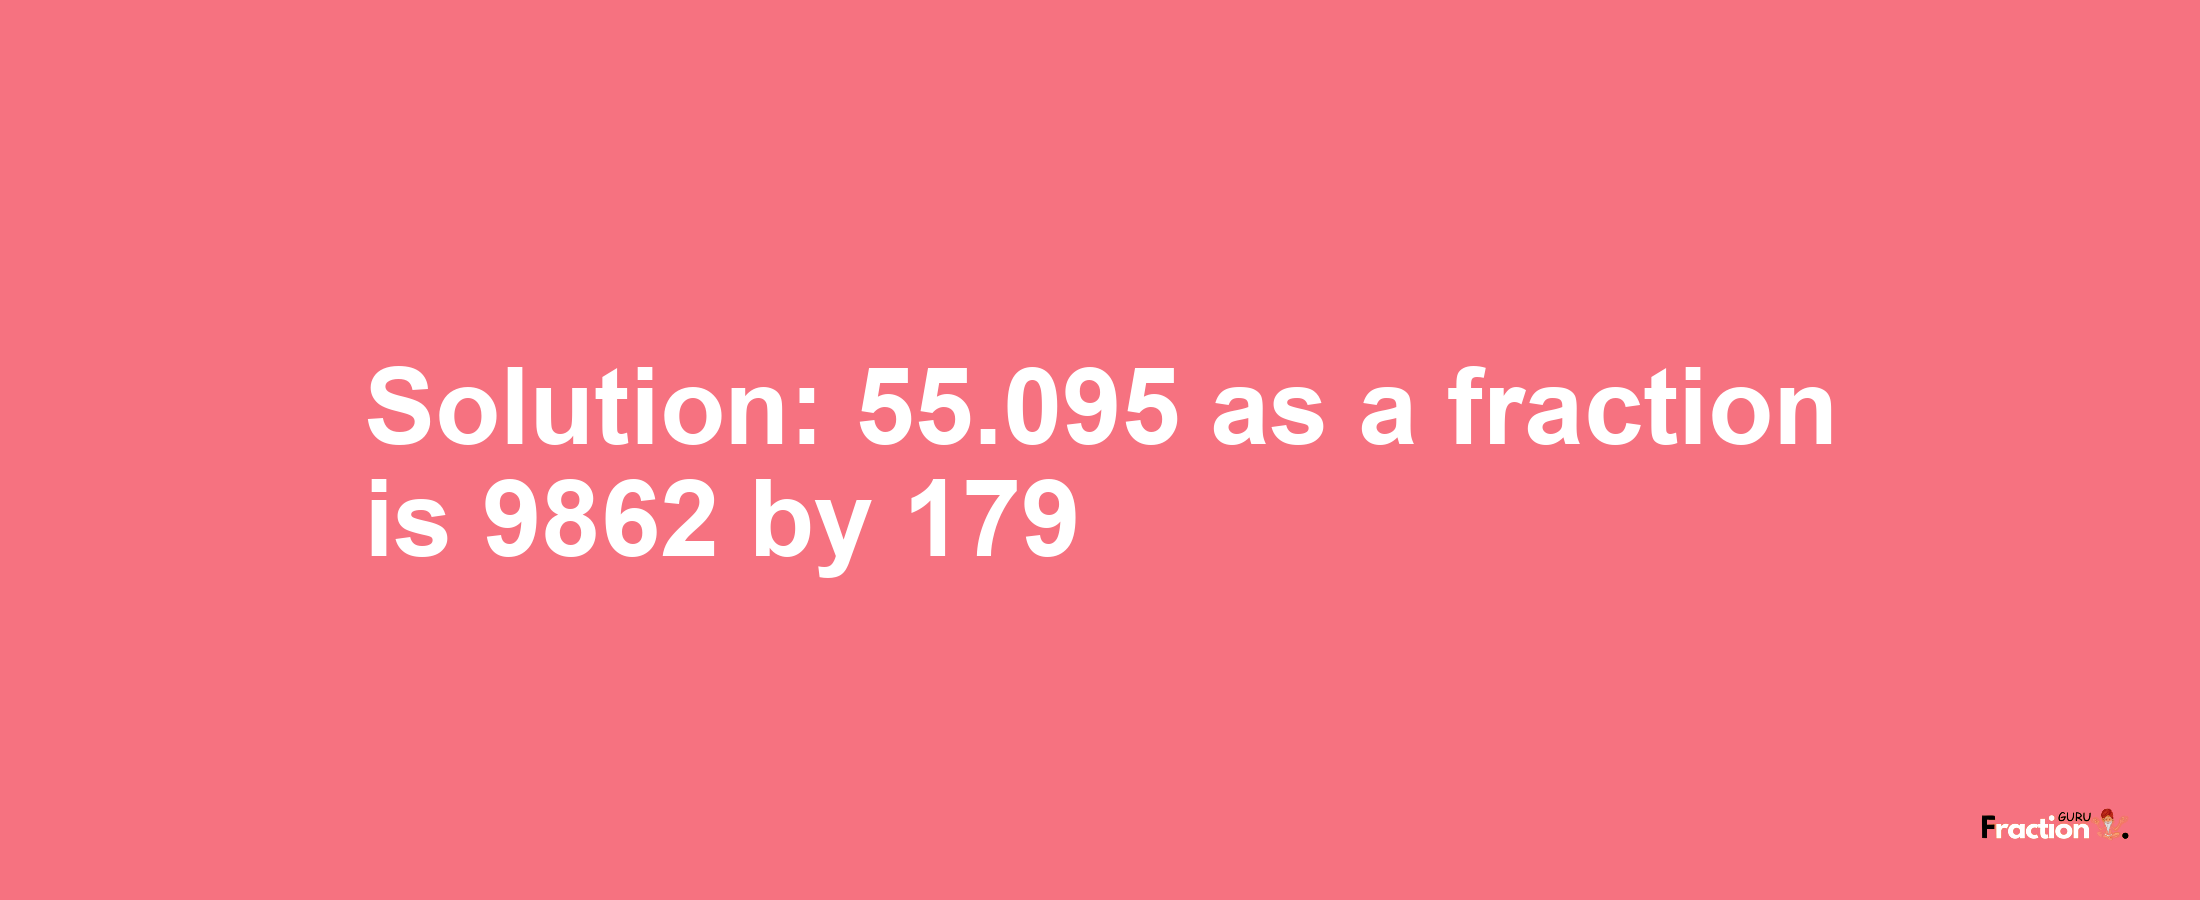 Solution:55.095 as a fraction is 9862/179